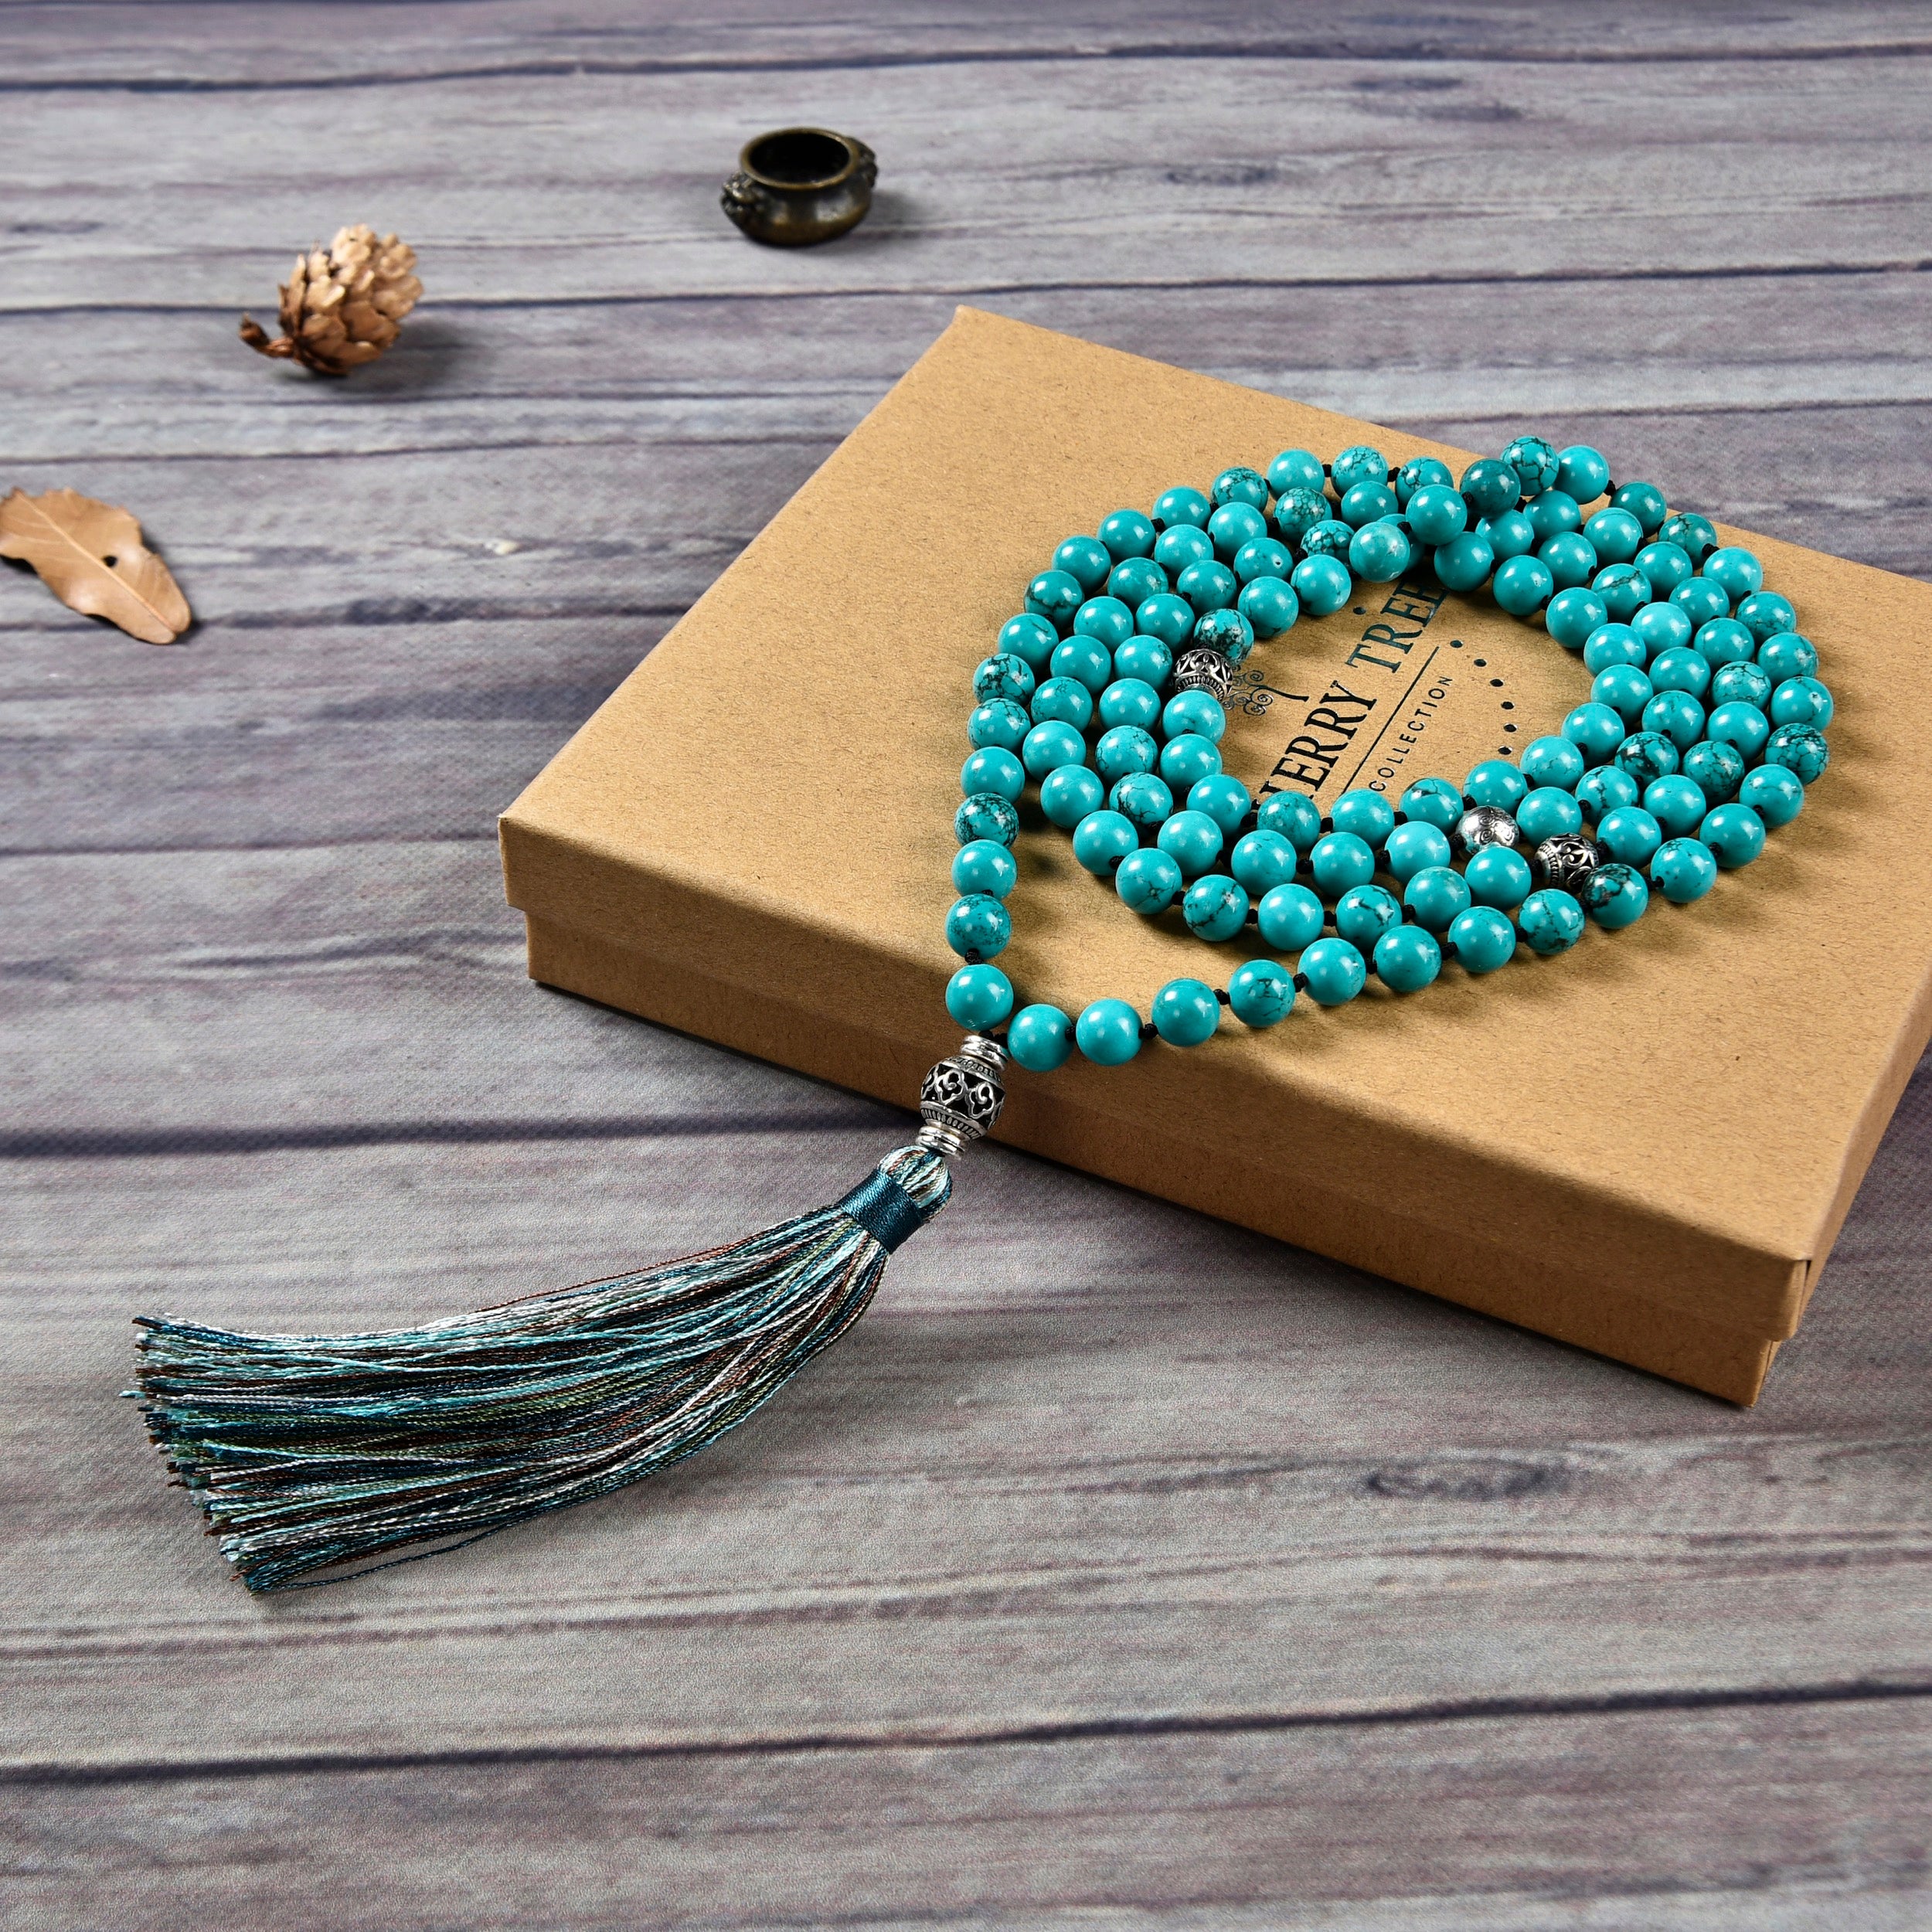 Mala Necklace | 108 Hand-Knotted 8mm Round Beads (Tibetan